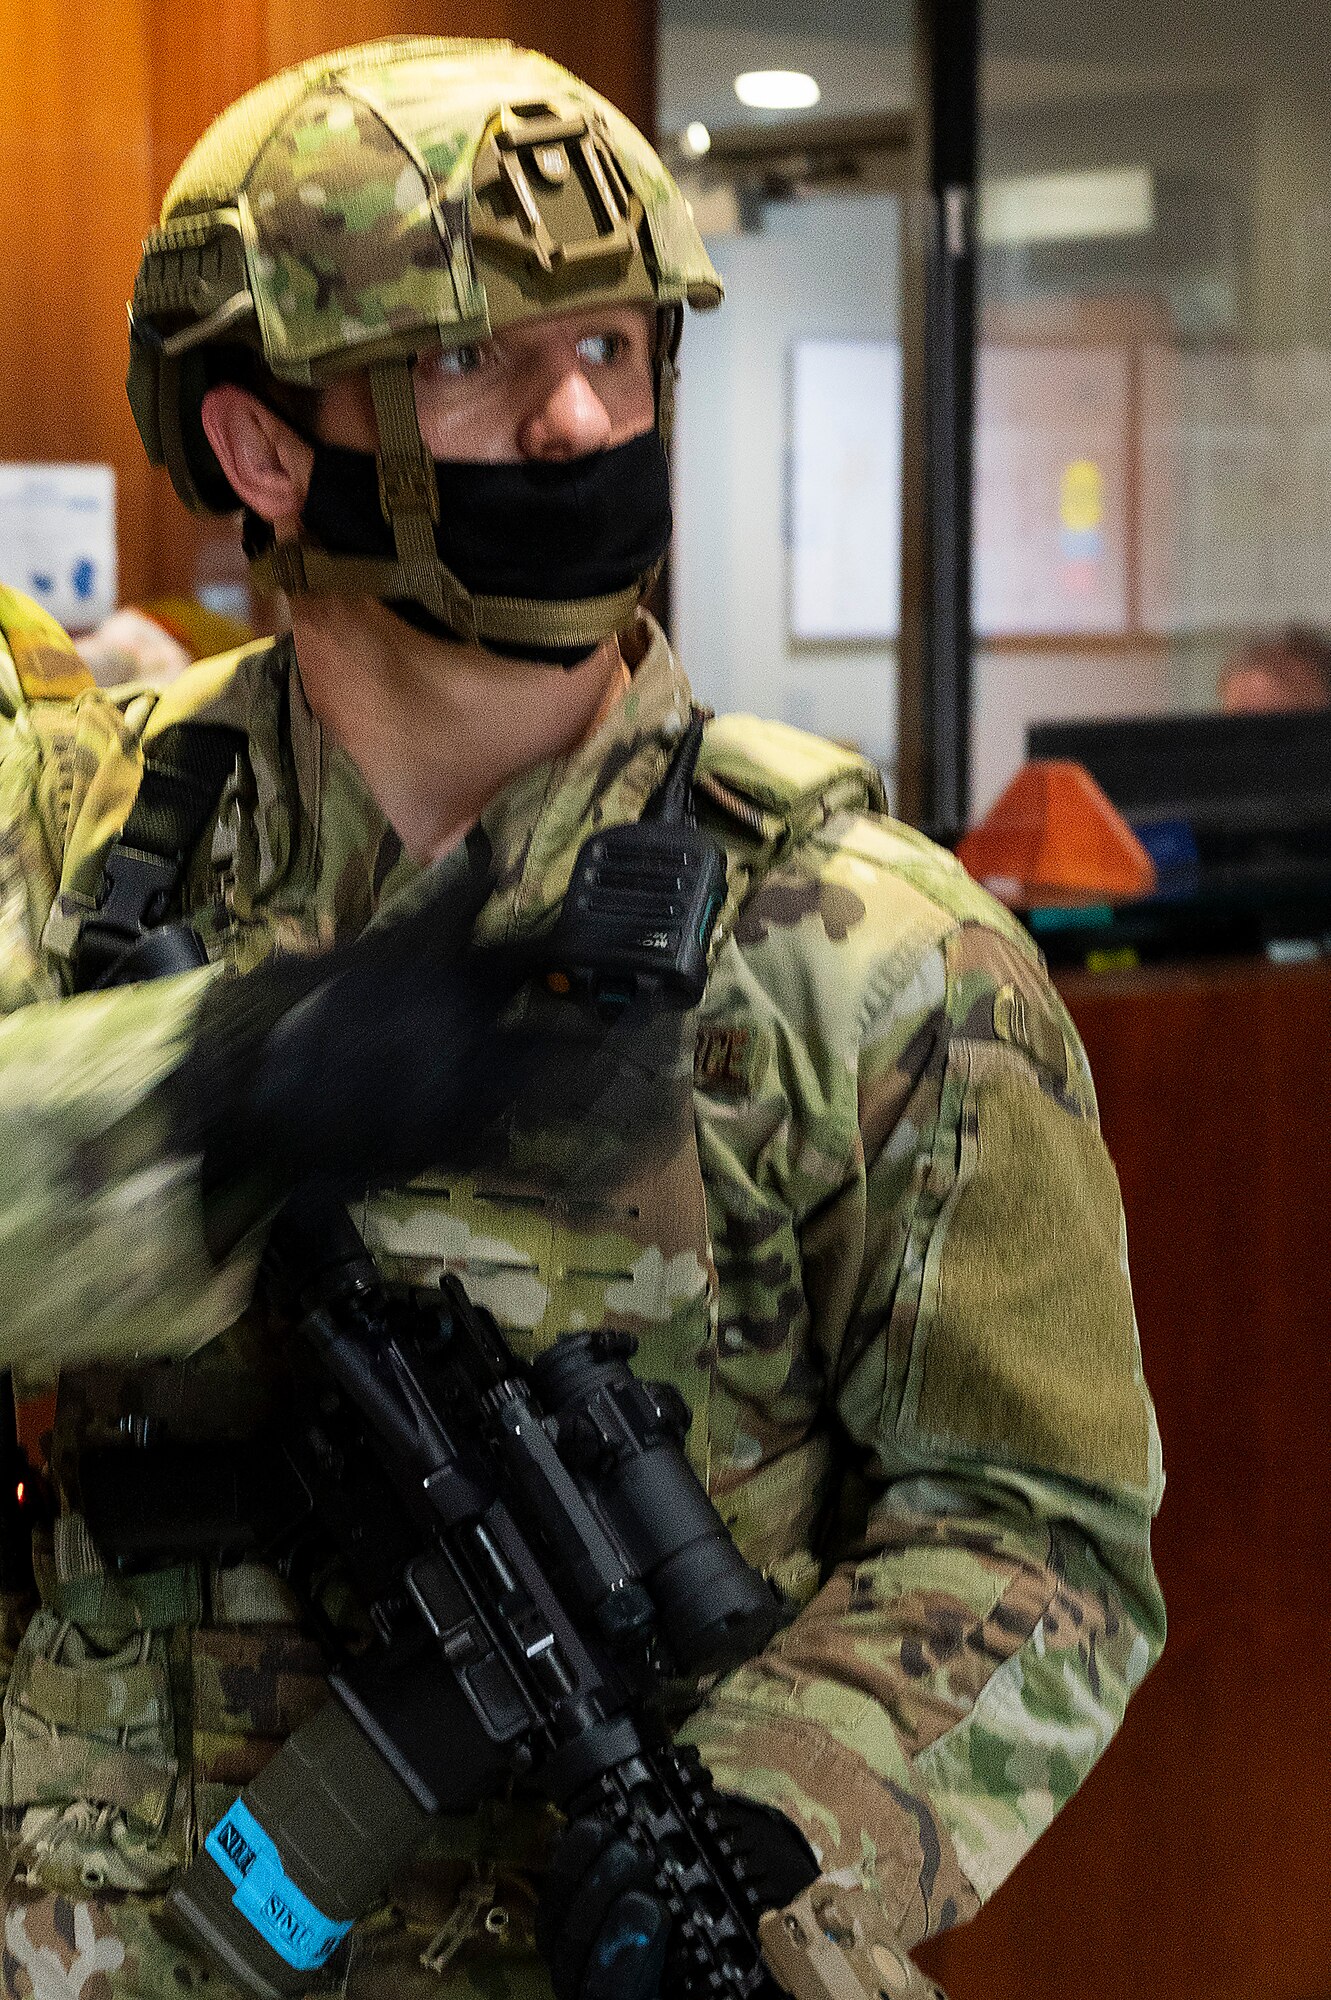 A Defender with the 88th Security Forces Squadron reaches for his radio during an active-shooter exercise Feb. 23, 2022, at Wright-Patterson Air Force Base, Ohio. The exercise gave first responders, including police, fire and medical personnel, the opportunity to practice coordinating emergency actions and procedures. (U.S. Air Force photo by R.J. Oriez)